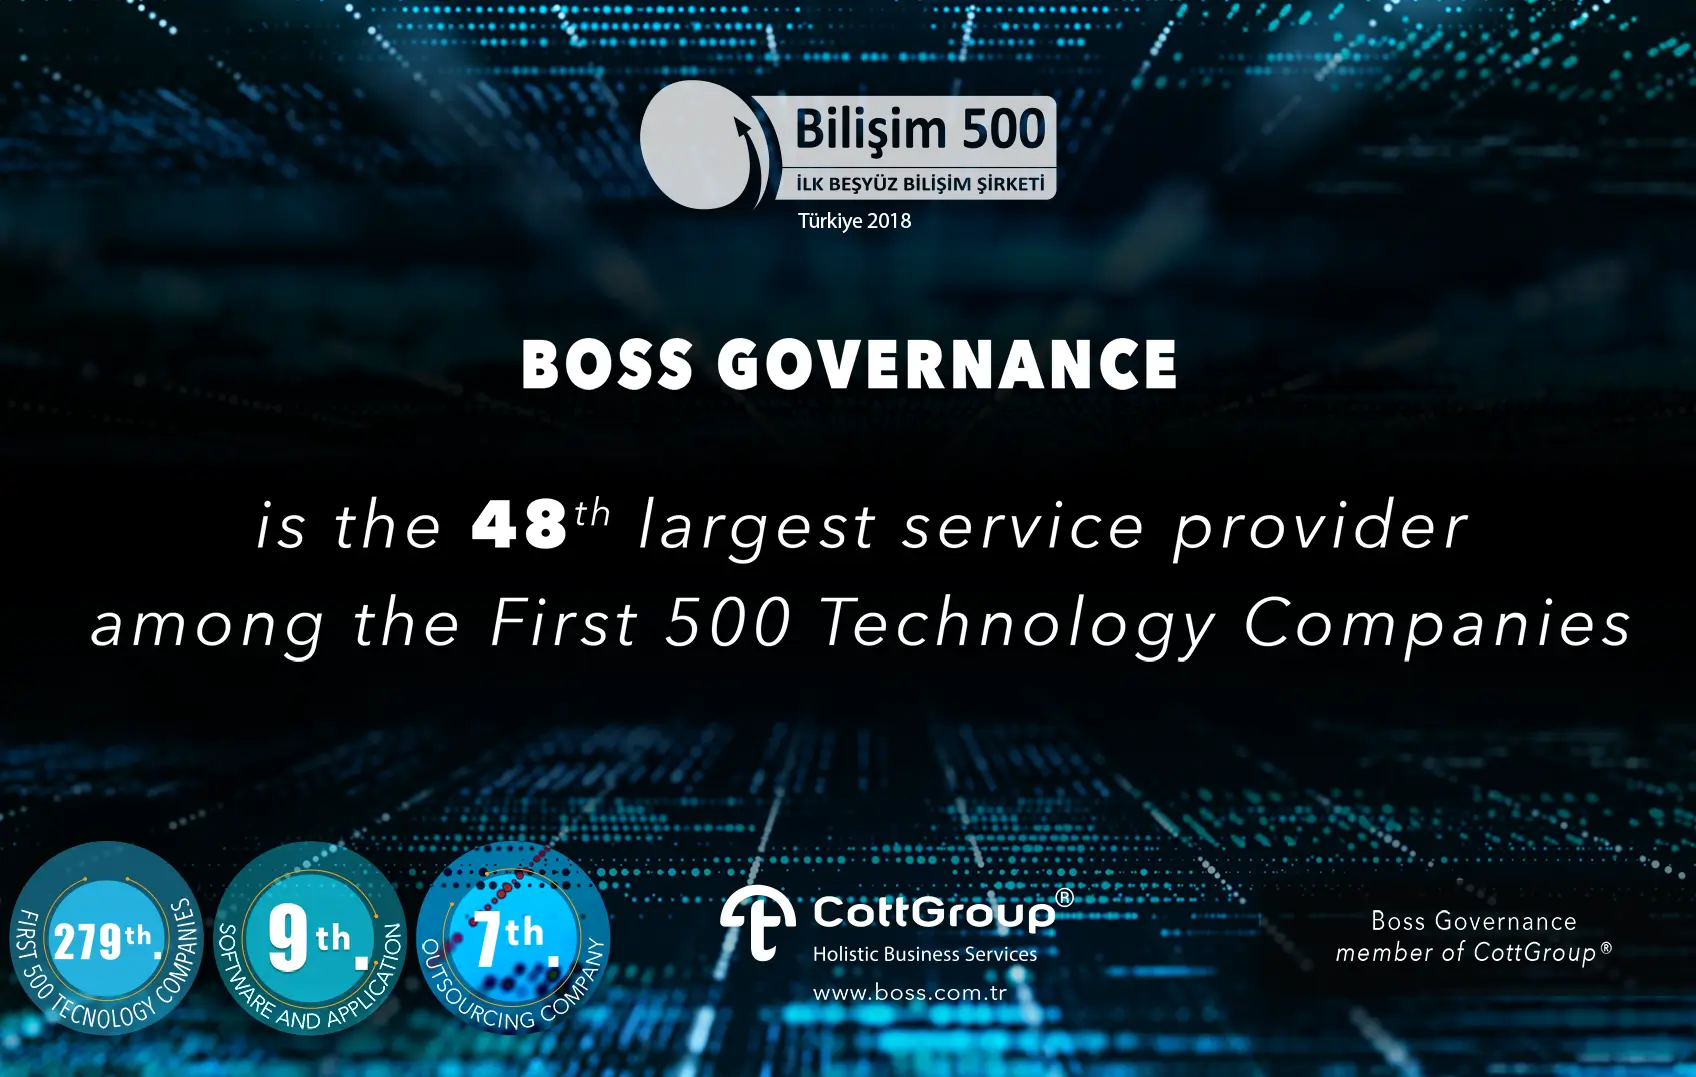 Boss Governance is the 48th largest service provider among the First 500 Technology Companies